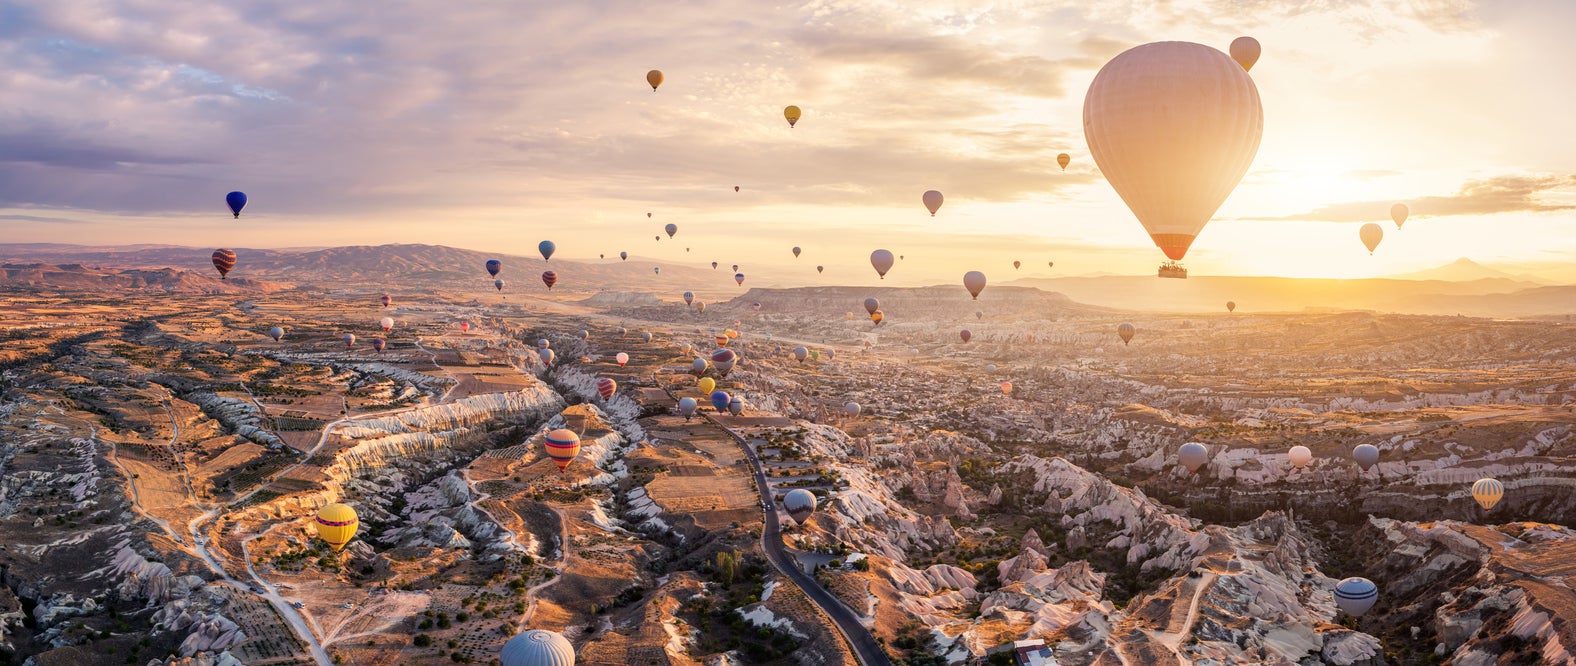 Cappadocia is one of Turkey’s most well-known destinations